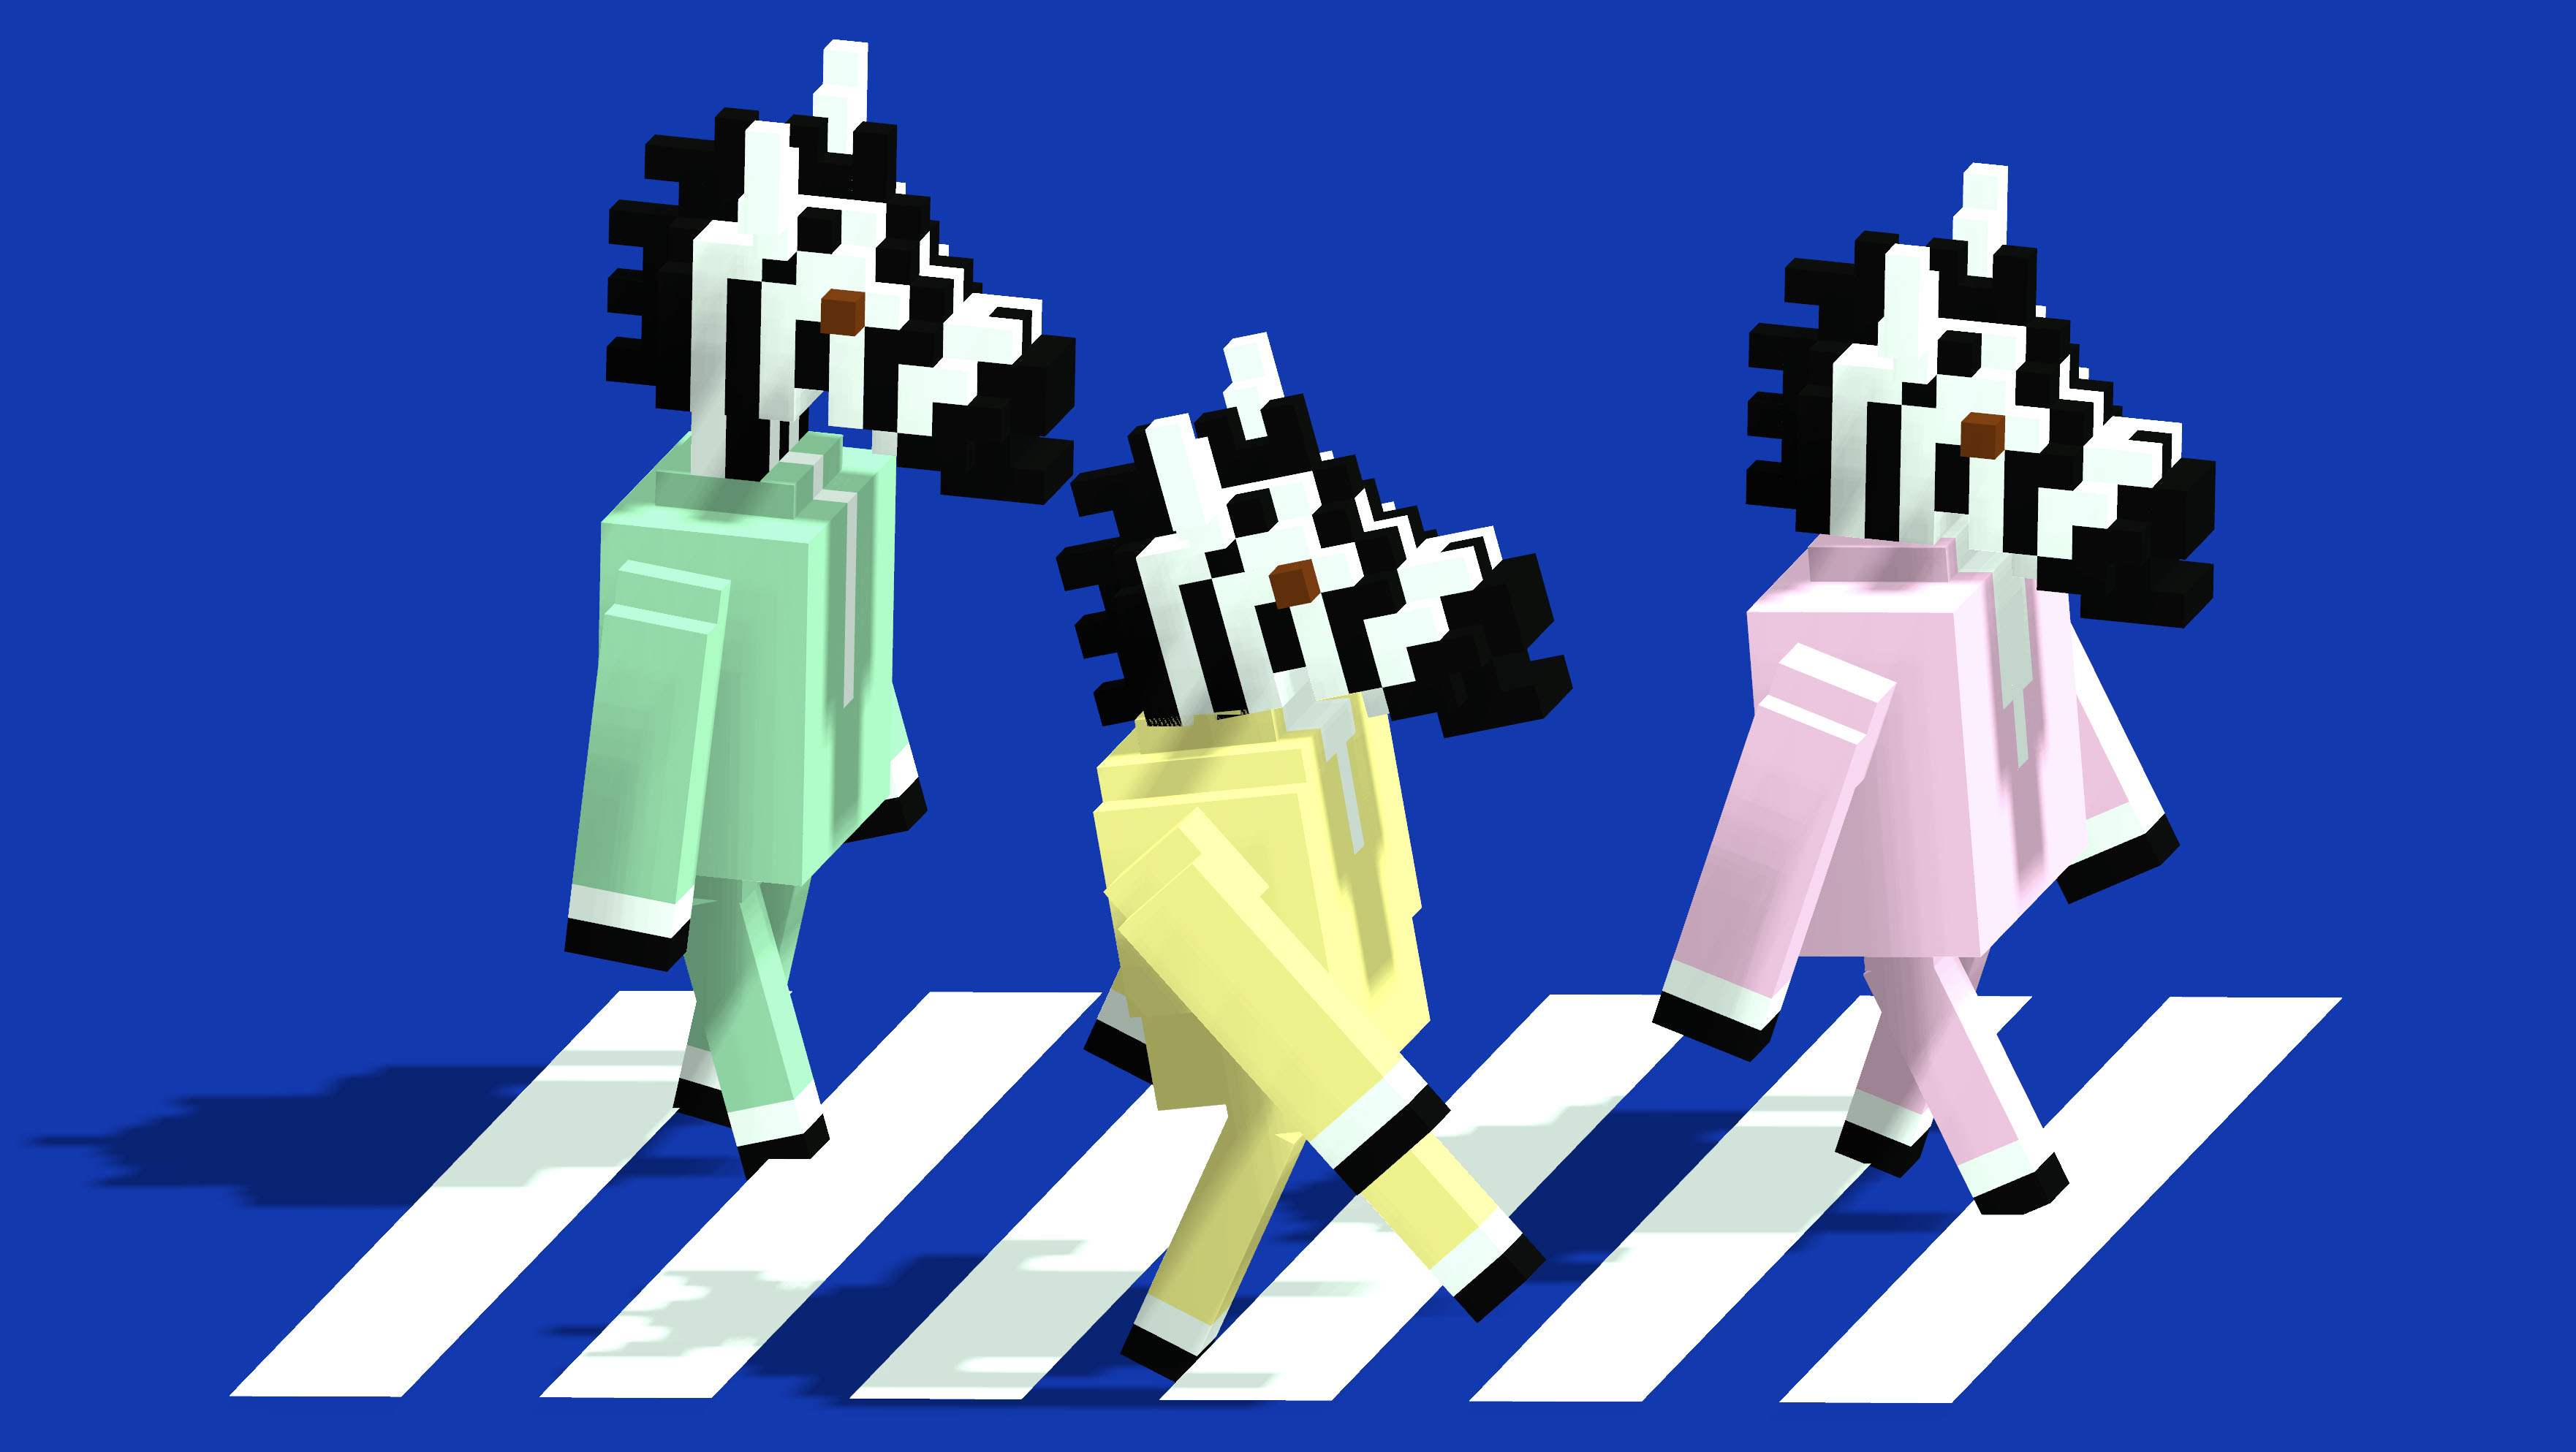 An illustration of three people with zebra heads crossing a zebra crossing in a 3D voxel art style on a blue background